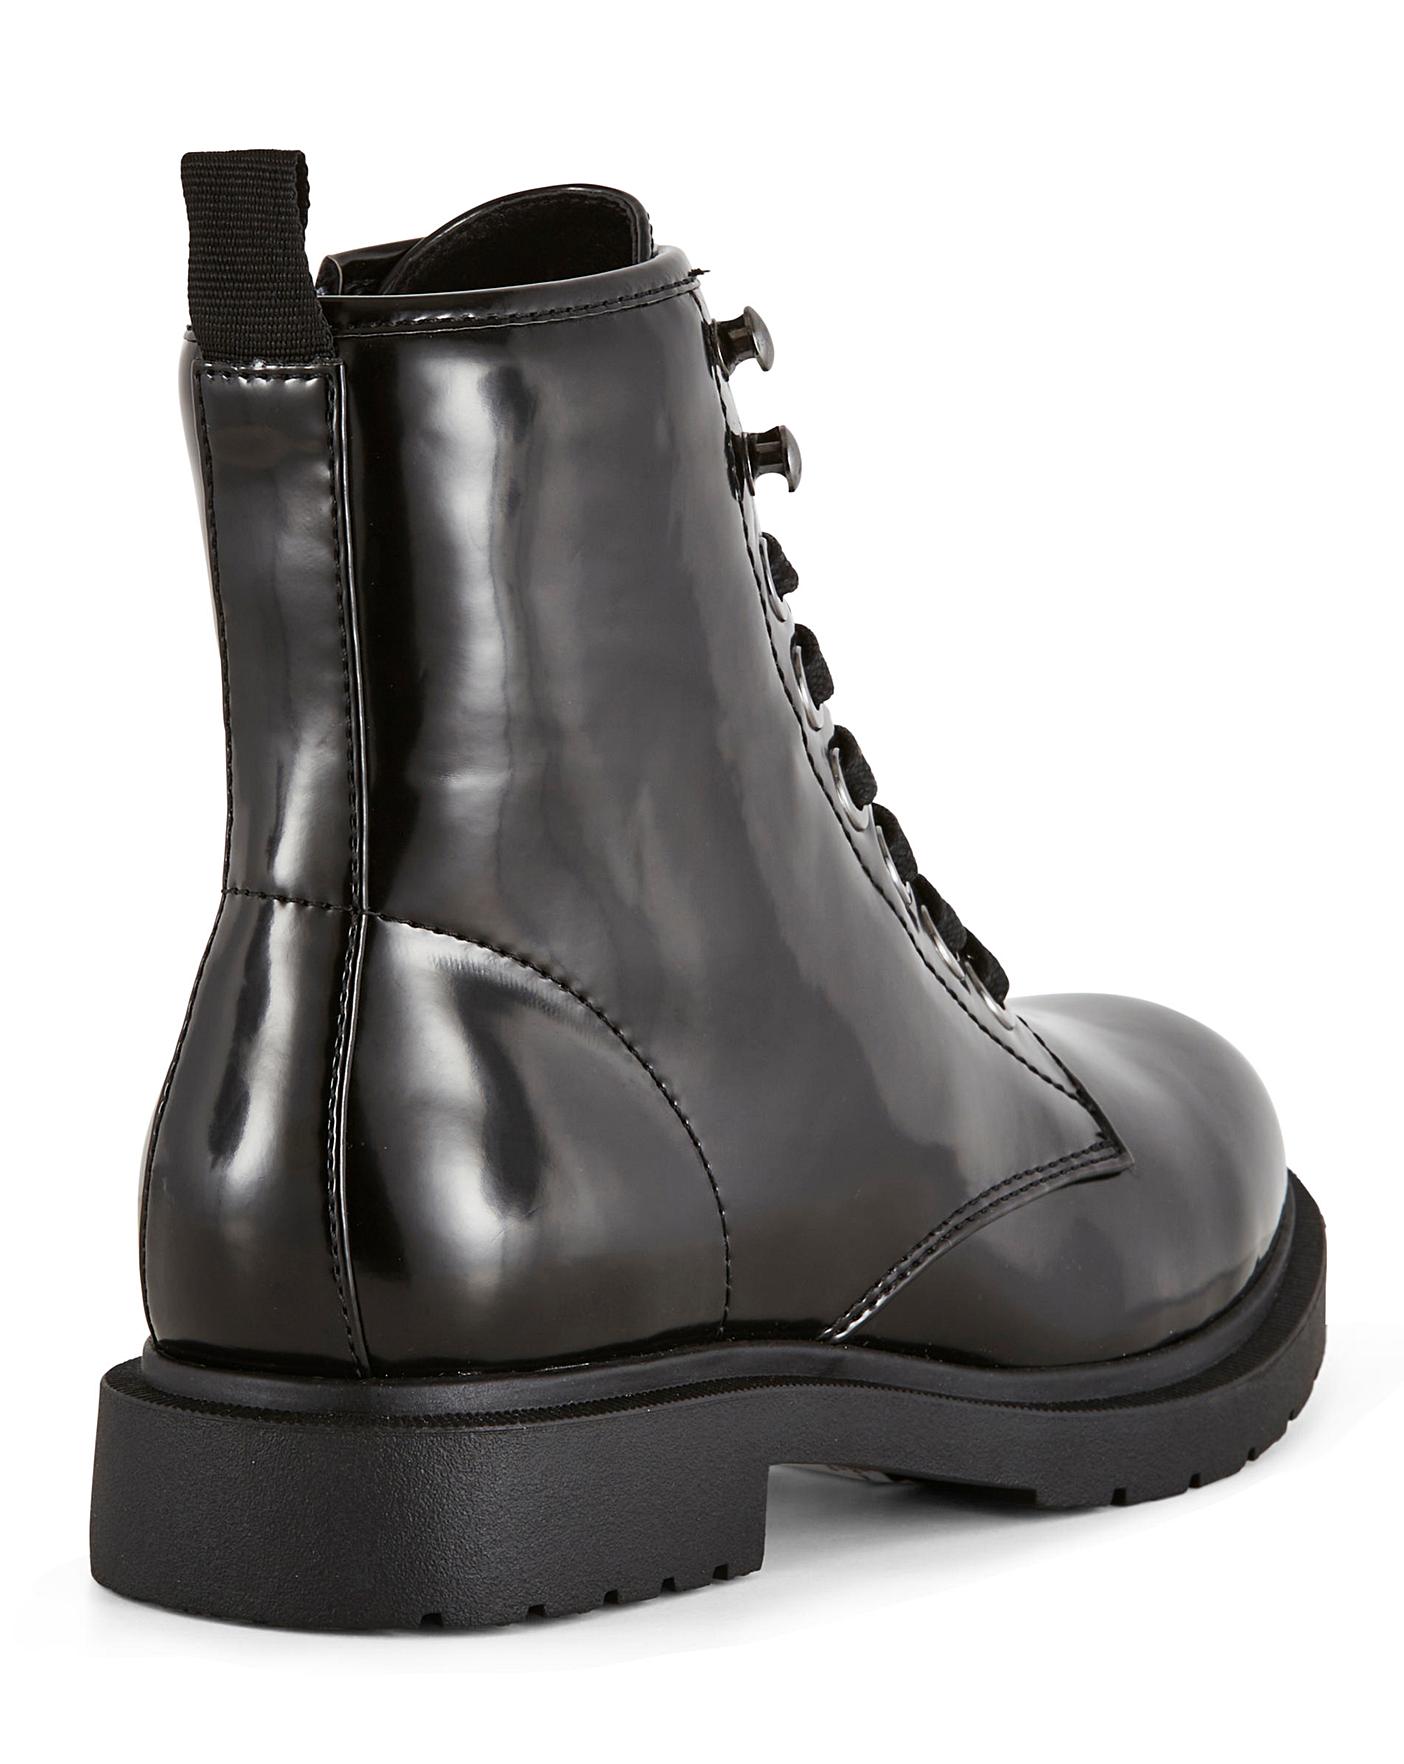 Tulip Ankle Boots Extra Wide Fit | J D Williams